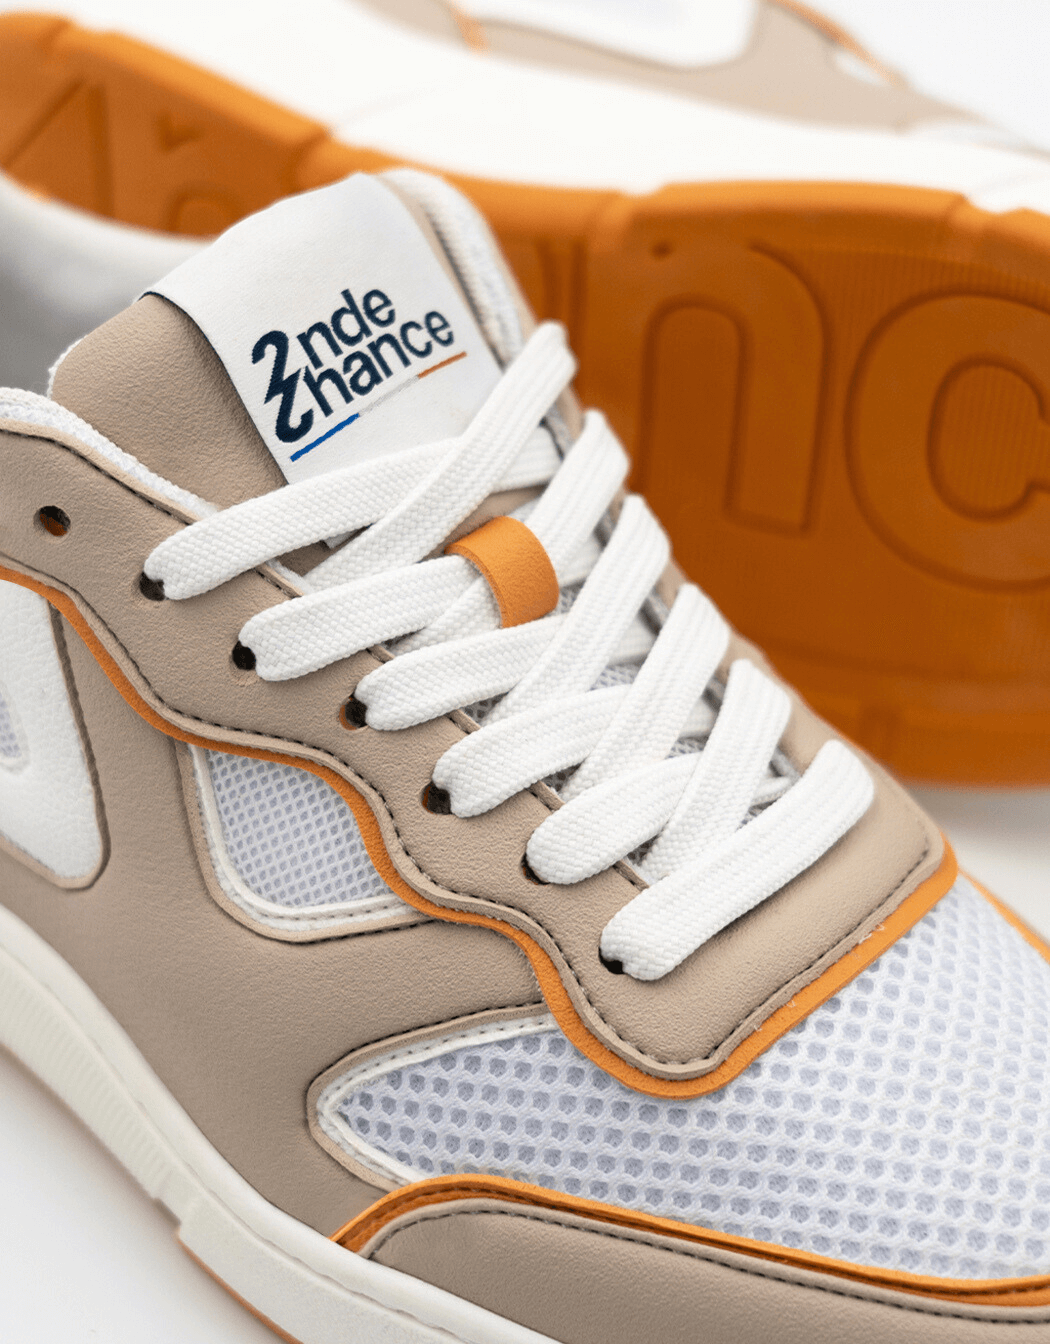 sneakers-neo-loopr3-2ndechance-camel-recyclees-recyclable-madeinfrance-dessus